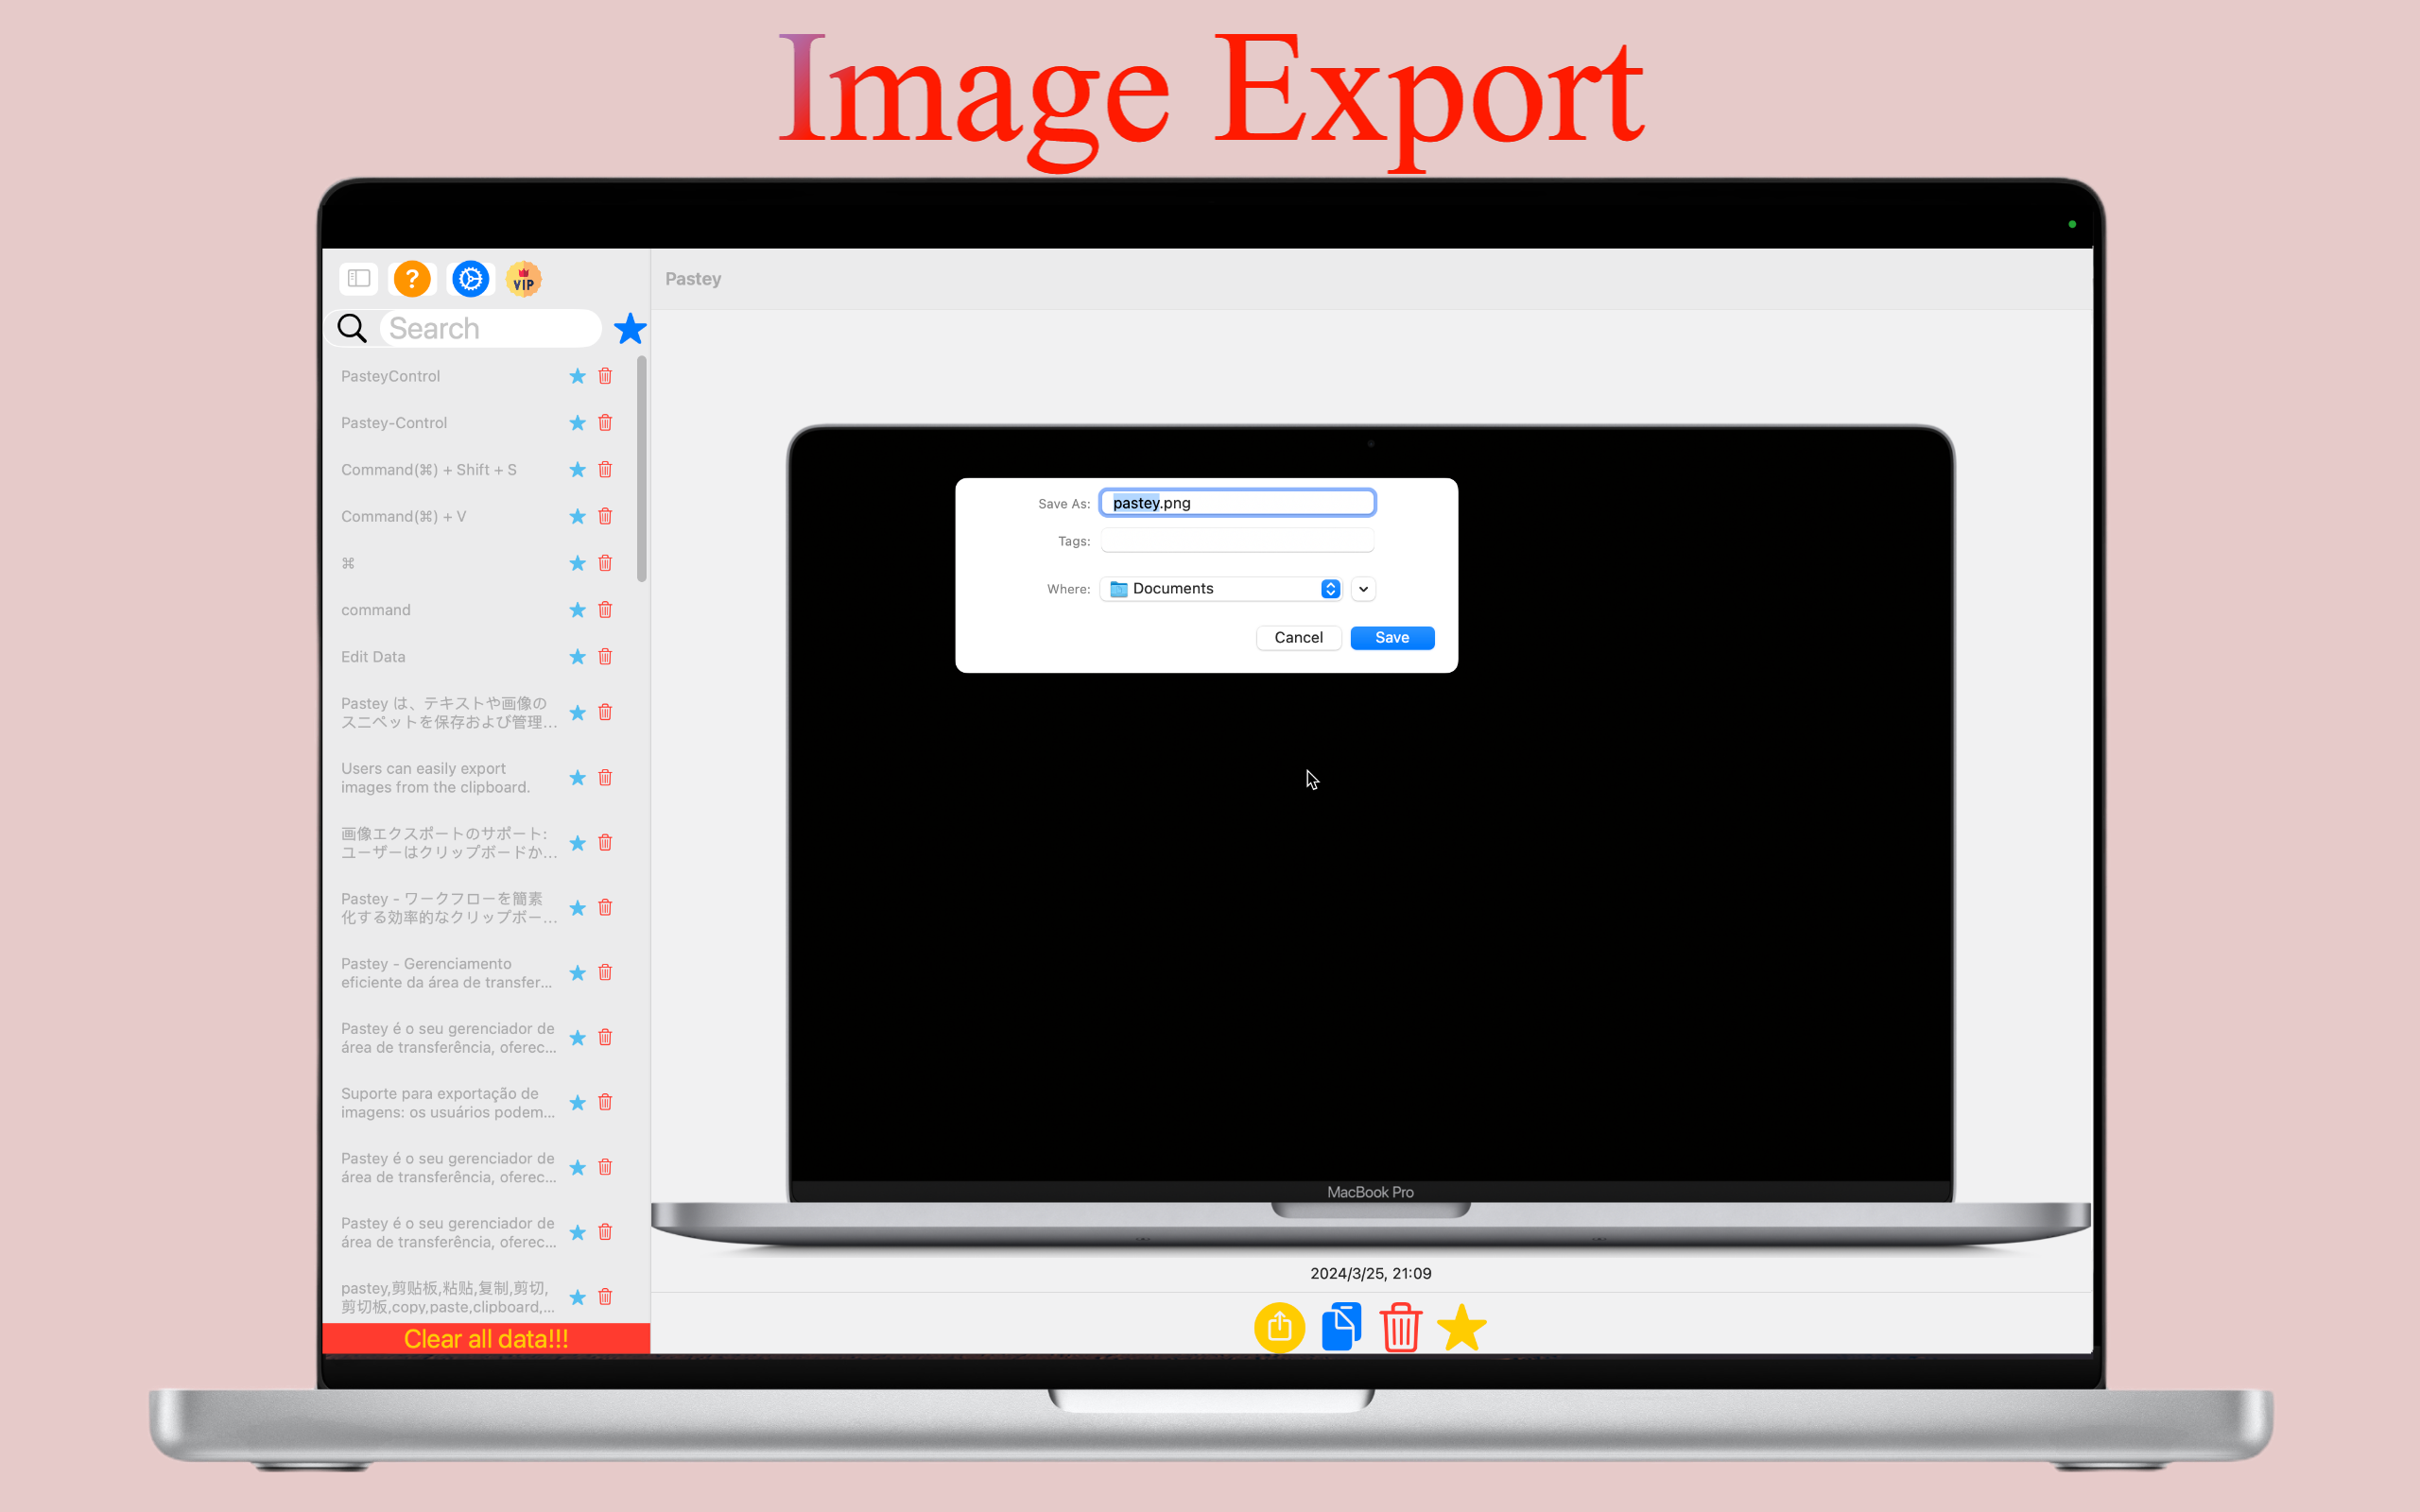 Supports exporting images